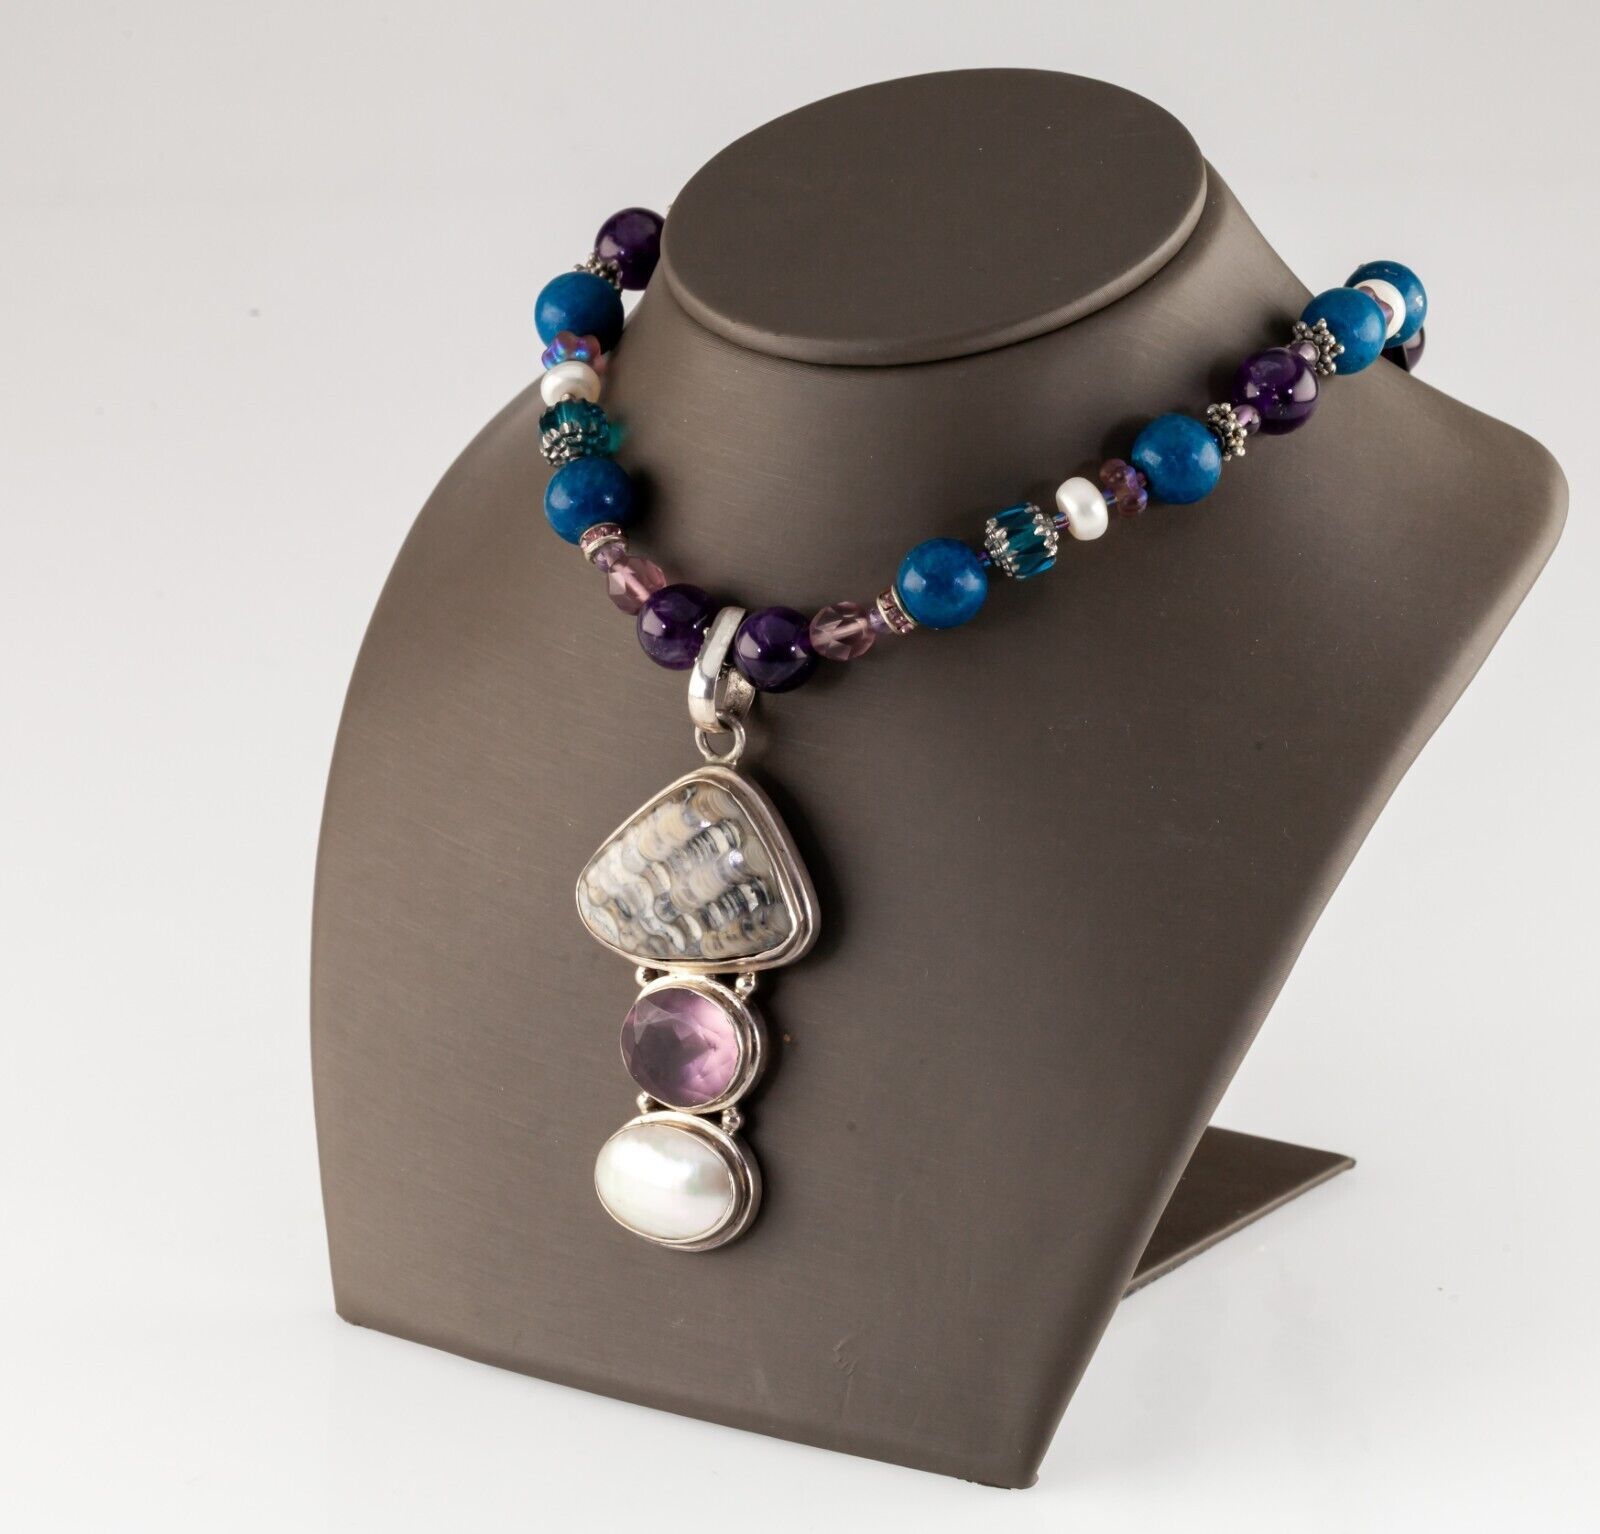 Gemstone Beaded Necklace with Mother of Pearl, Amethyst, and Fossil Clam Pendant - $534.60